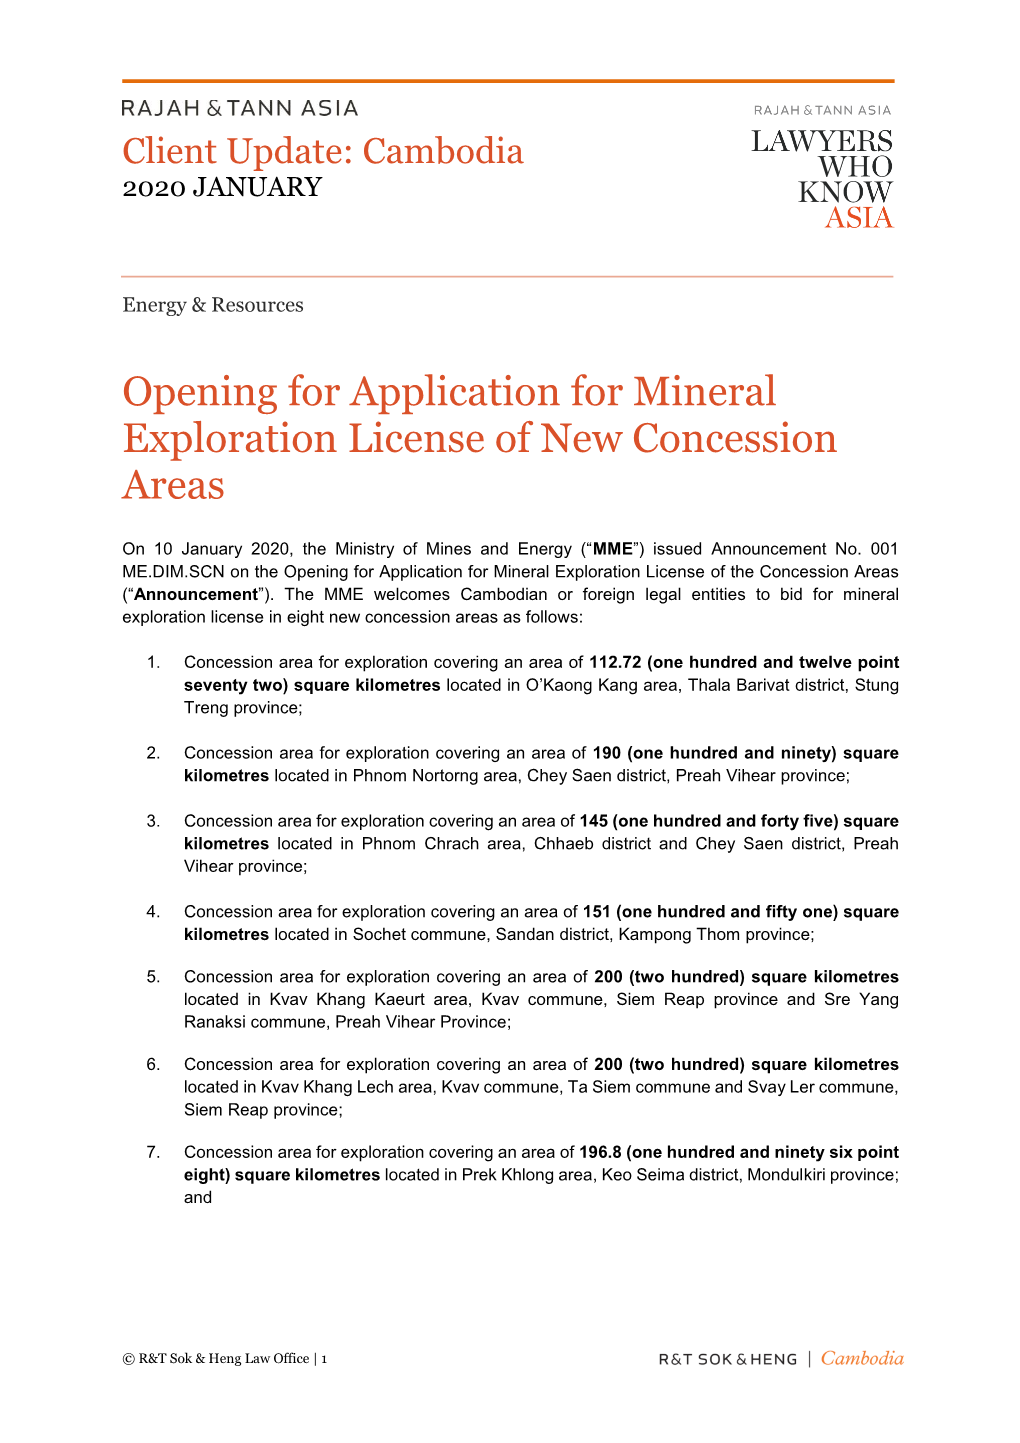 Opening for Application for Mineral Exploration License of New Concession Areas